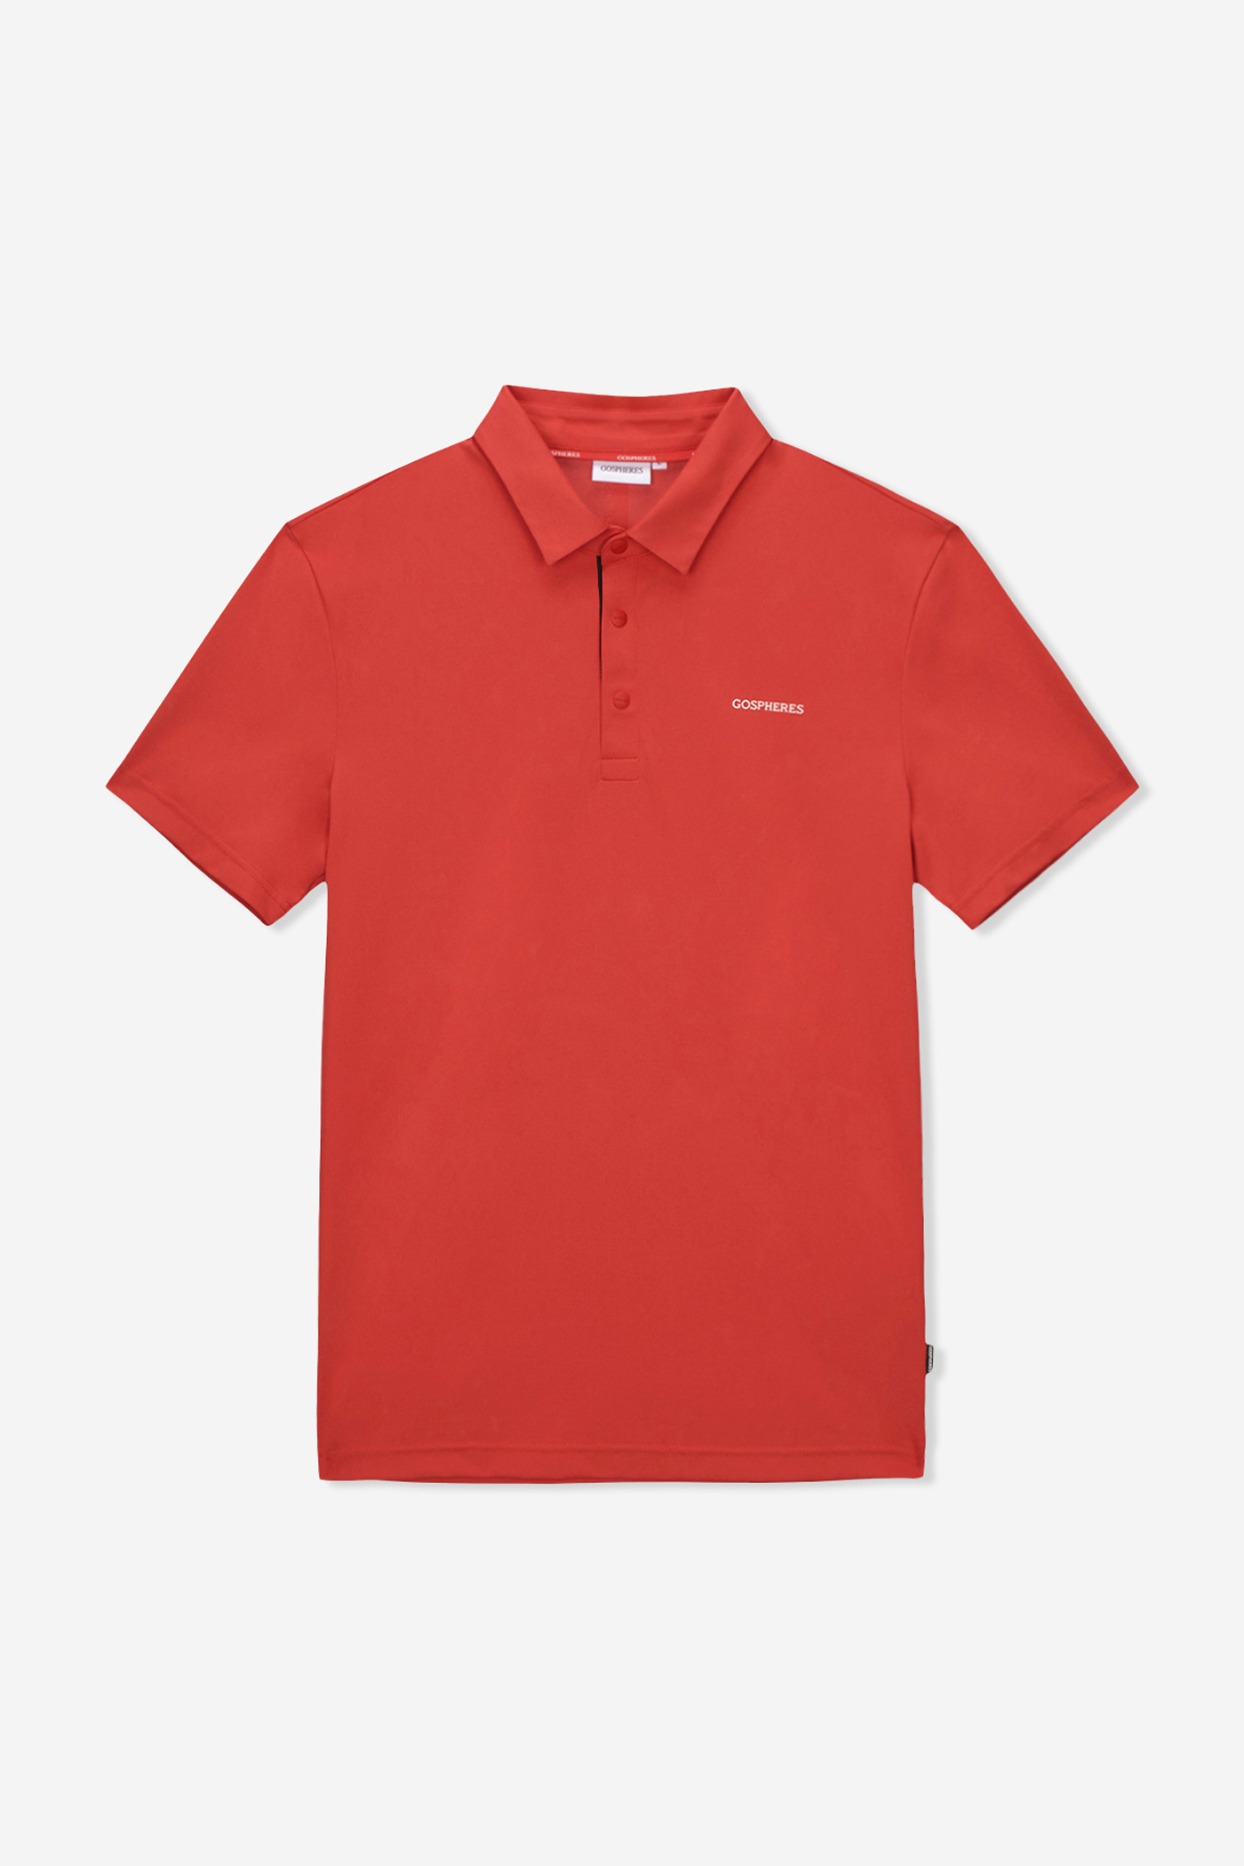 M CLASSIC PERFORMANCE POLO T-SHIRT RED